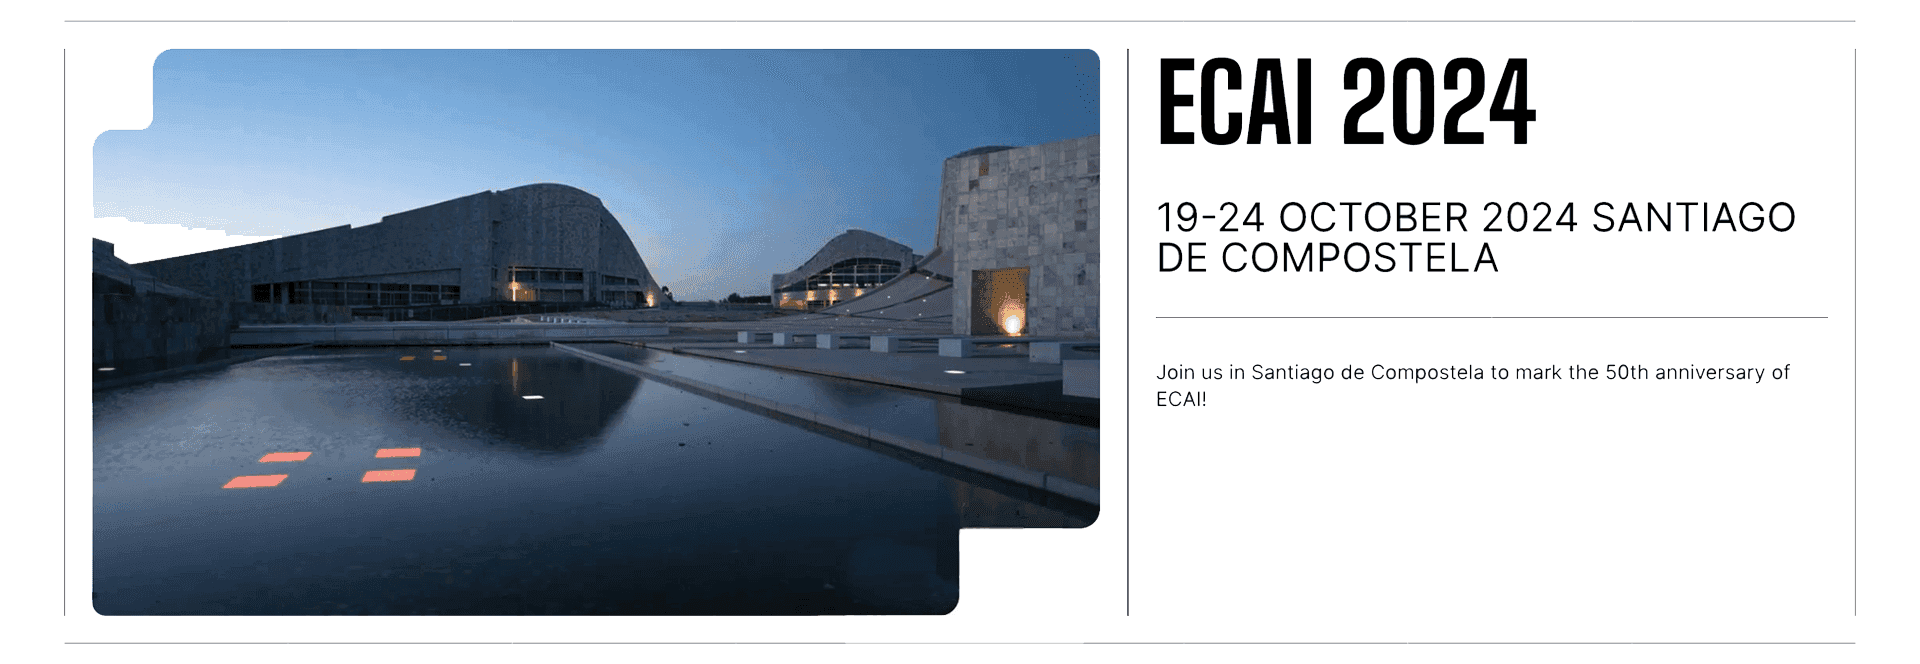 Call for papers: ECAI 2024